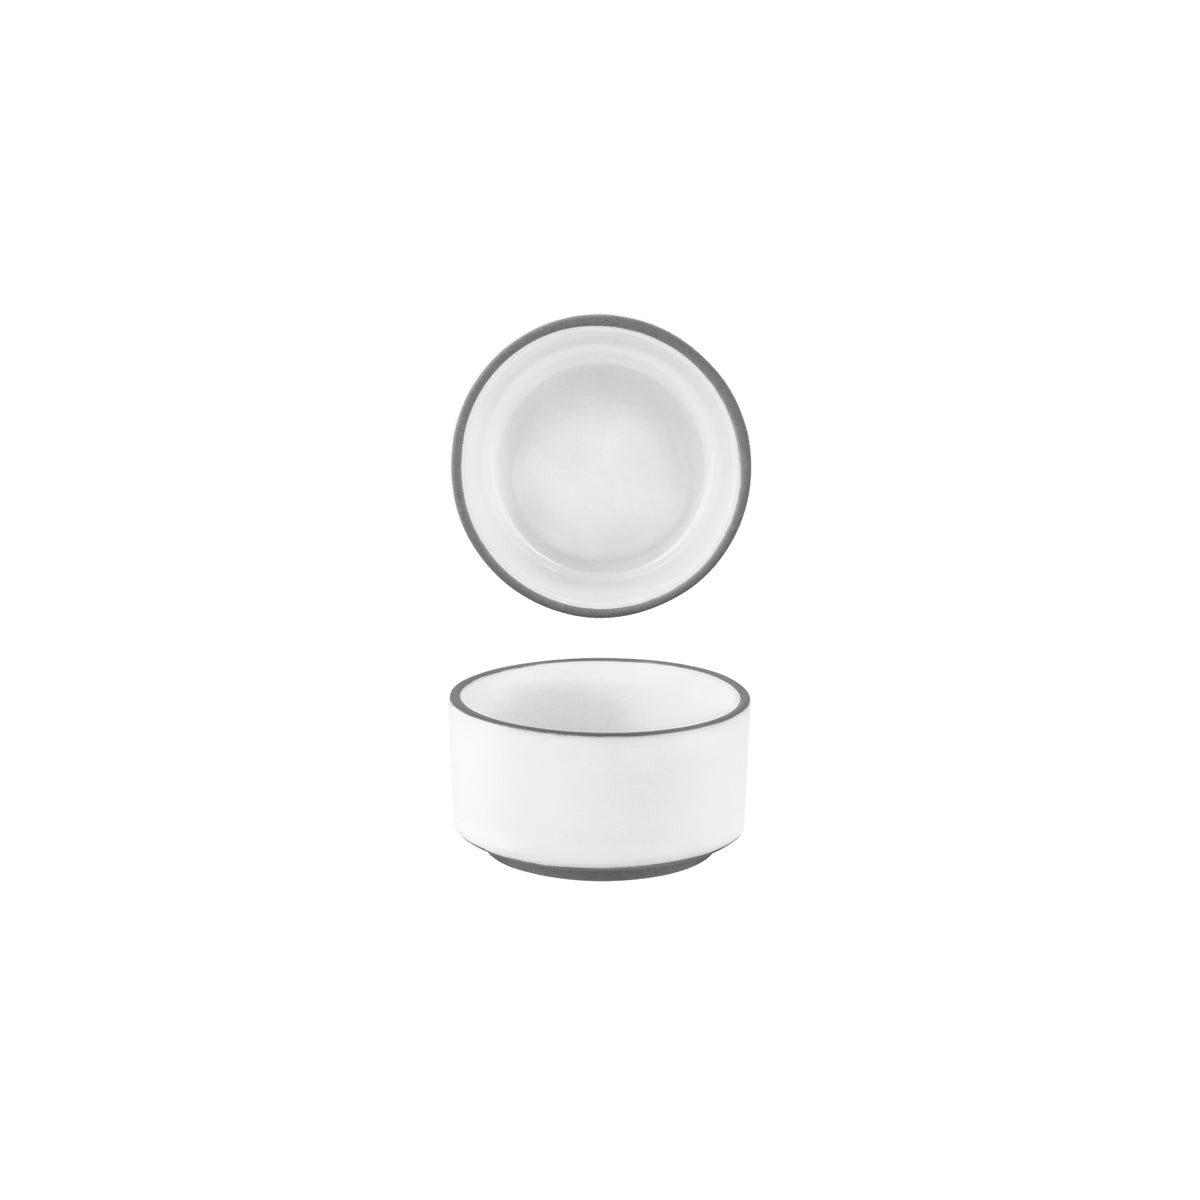 Stackable Sauce Dish - 65x35mm, White, Urban Muse: Pack of 8